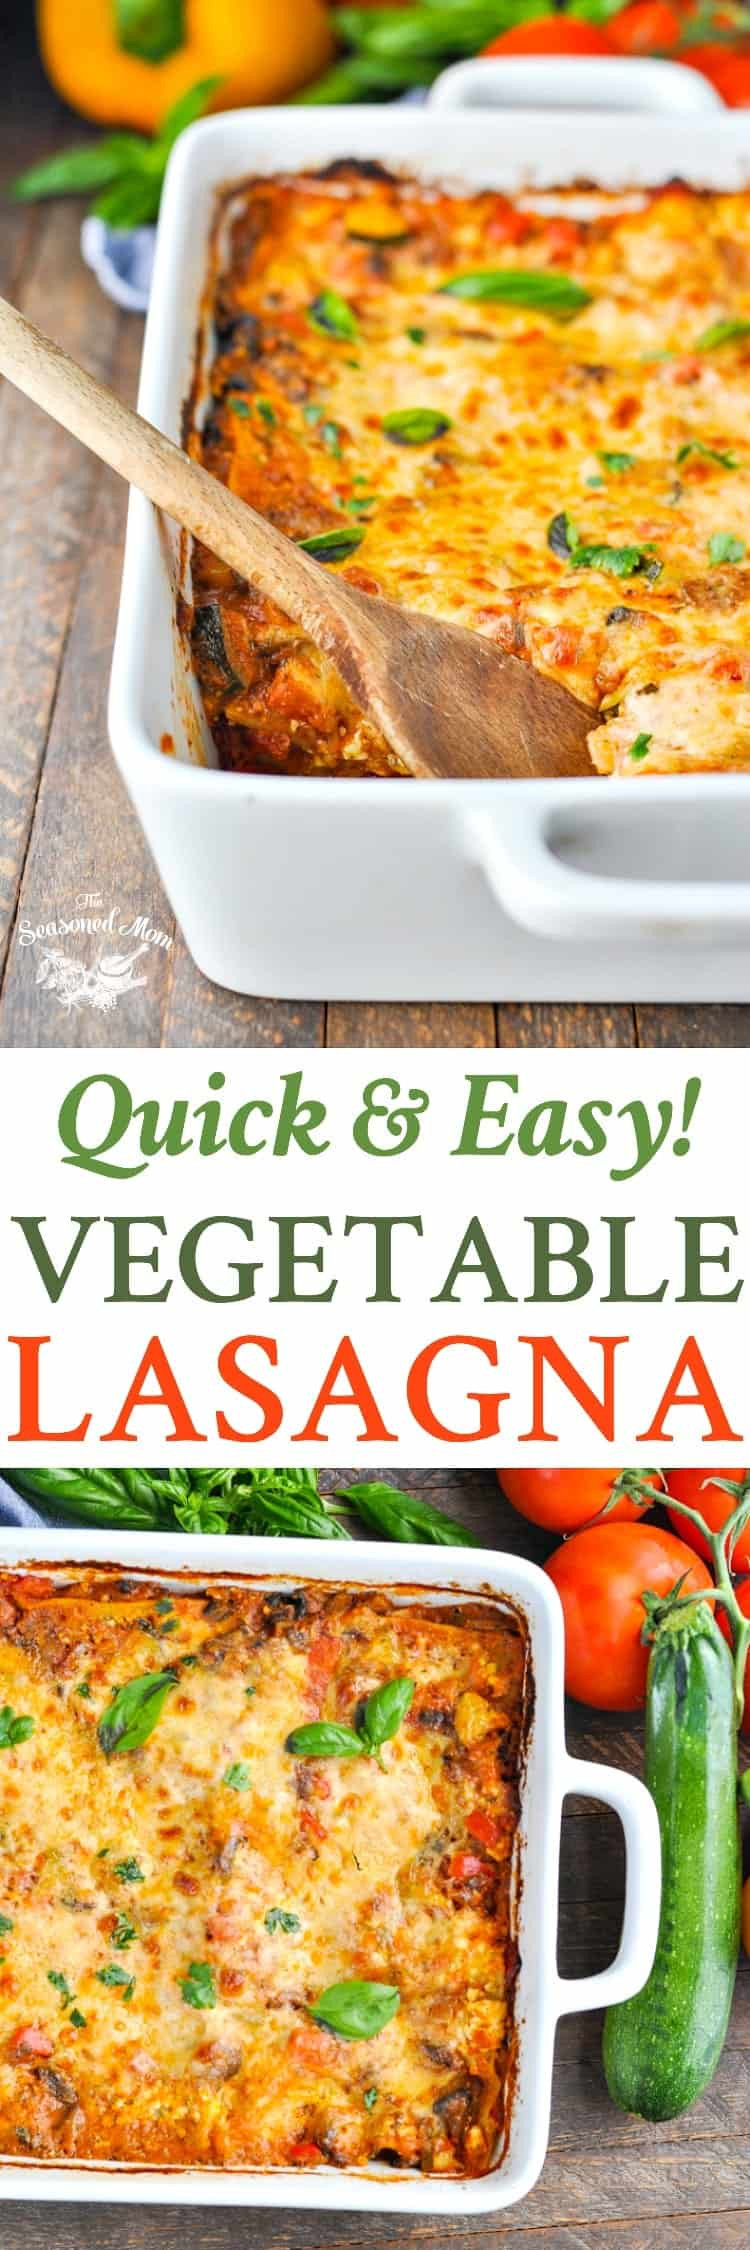 Quick And Easy Vegetarian Recipes
 Quick and Easy Ve able Lasagna The Seasoned Mom